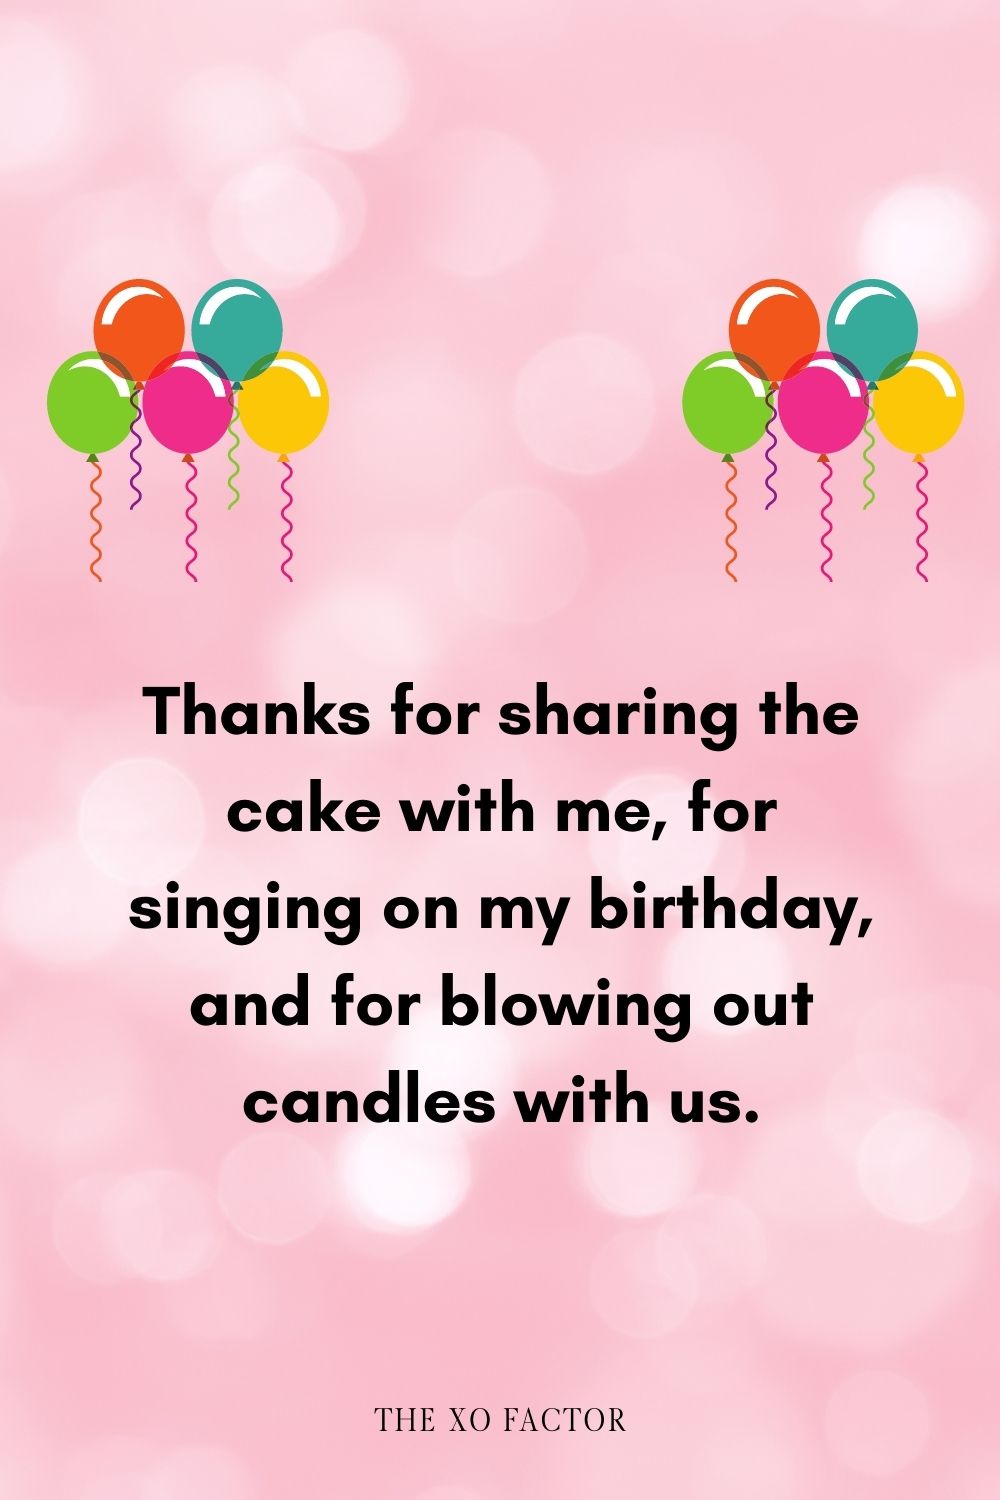 Thanks for sharing the cake with me, for singing on my birthday, and for blowing out candles with us.